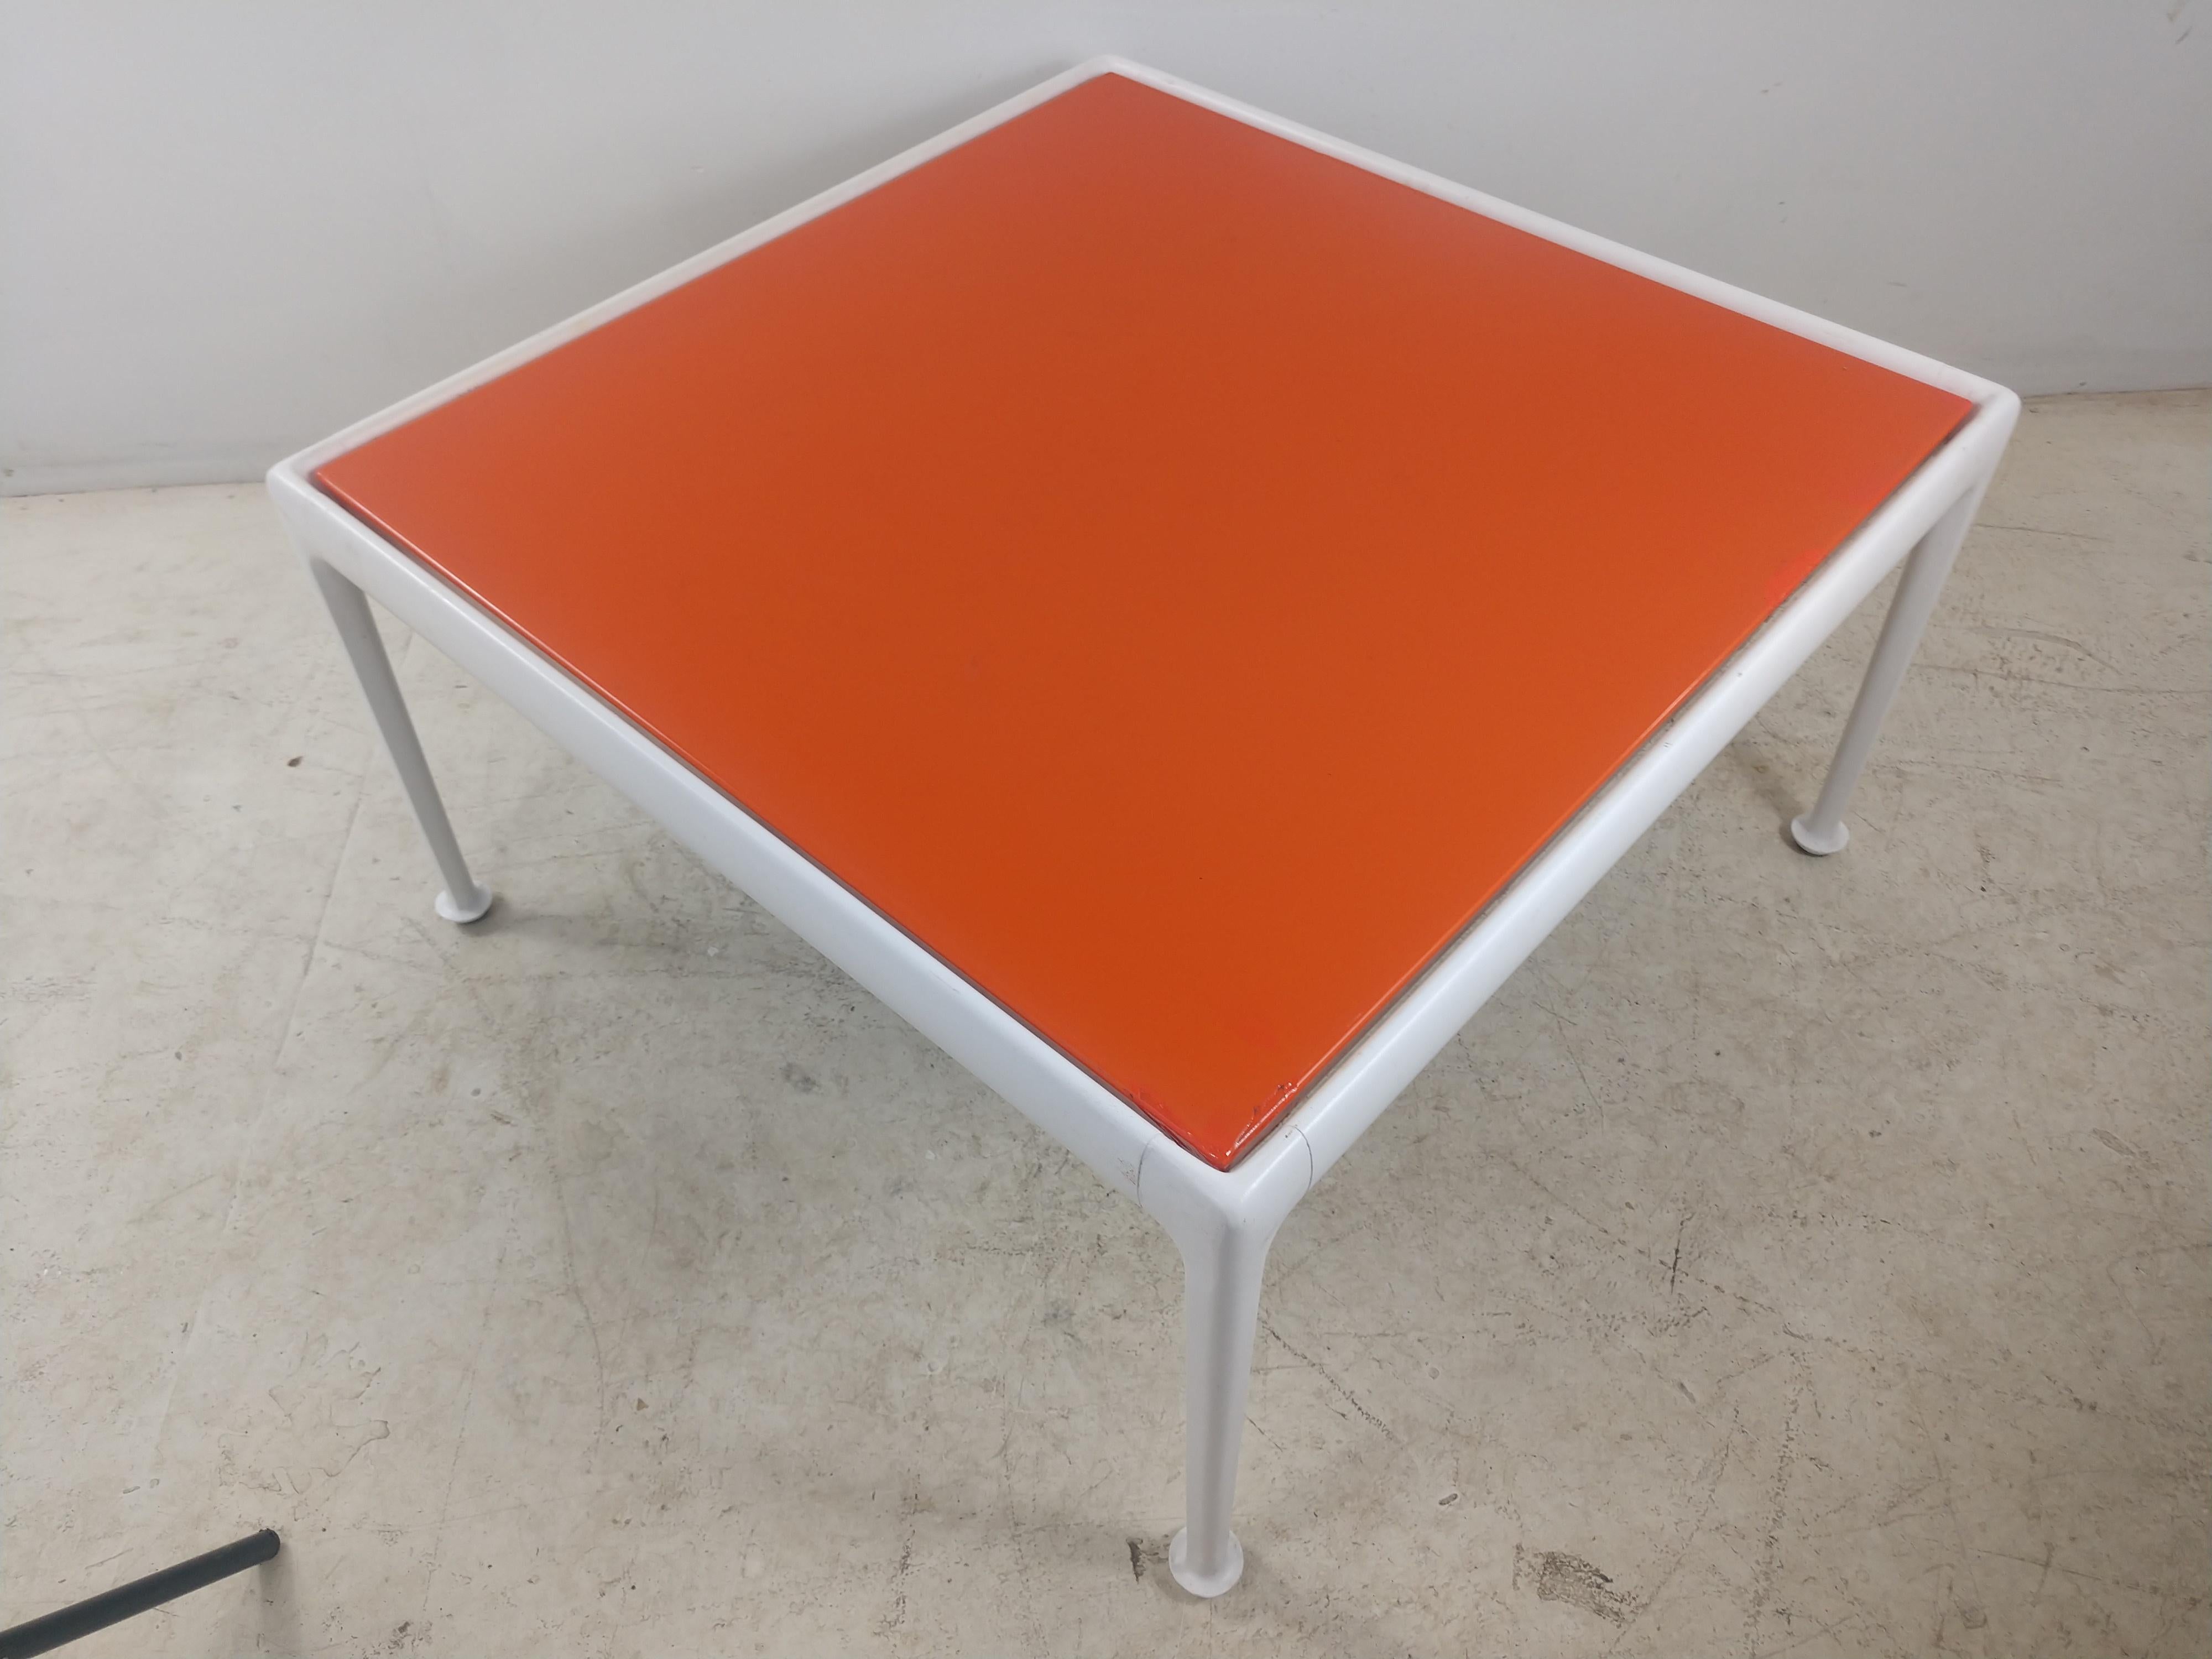 Fabulous cocktail table by Richard Schultz for Knoll in enameled steel top, orange and a powder coated base, circa 1974. Some minor chips to the top mostly on the corners which have been touched up. Base is very clean with original glides. This item